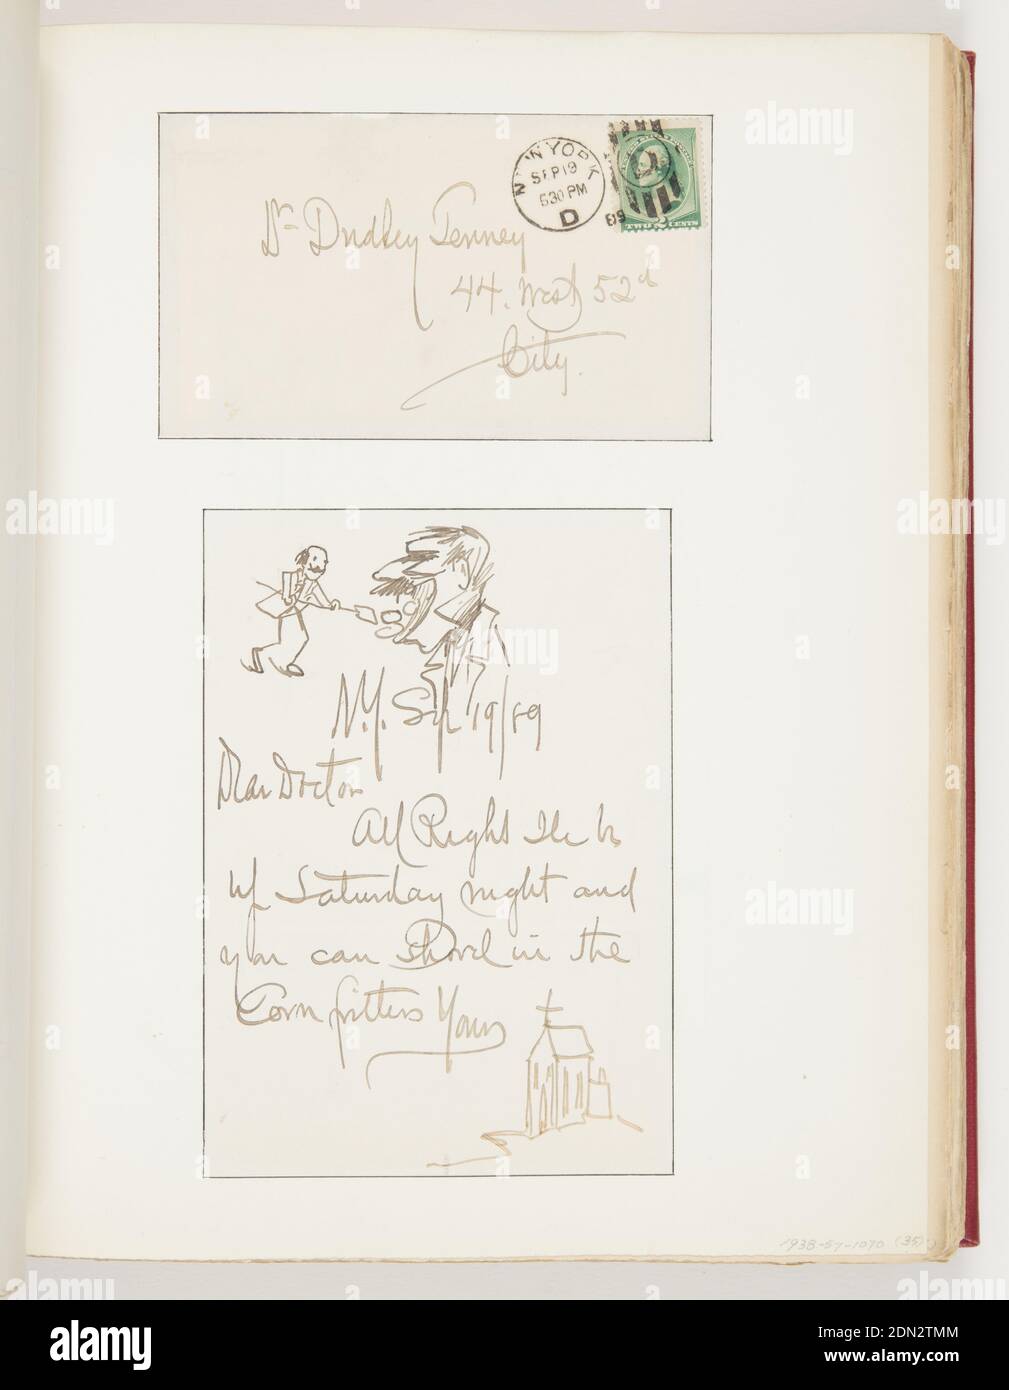 Letter to Dr. Dudley Tenney, Pen and black ink on paper, Top; envelope addressed to Dr. Dudley Tenney. Bottom; letter to Dr. Dudley Tenney; above picture of man shoveling objects into other man’s mouth, right. Lower right, sketch of church., USA, 1889, ephemera, Ephemera, Ephemera Stock Photo